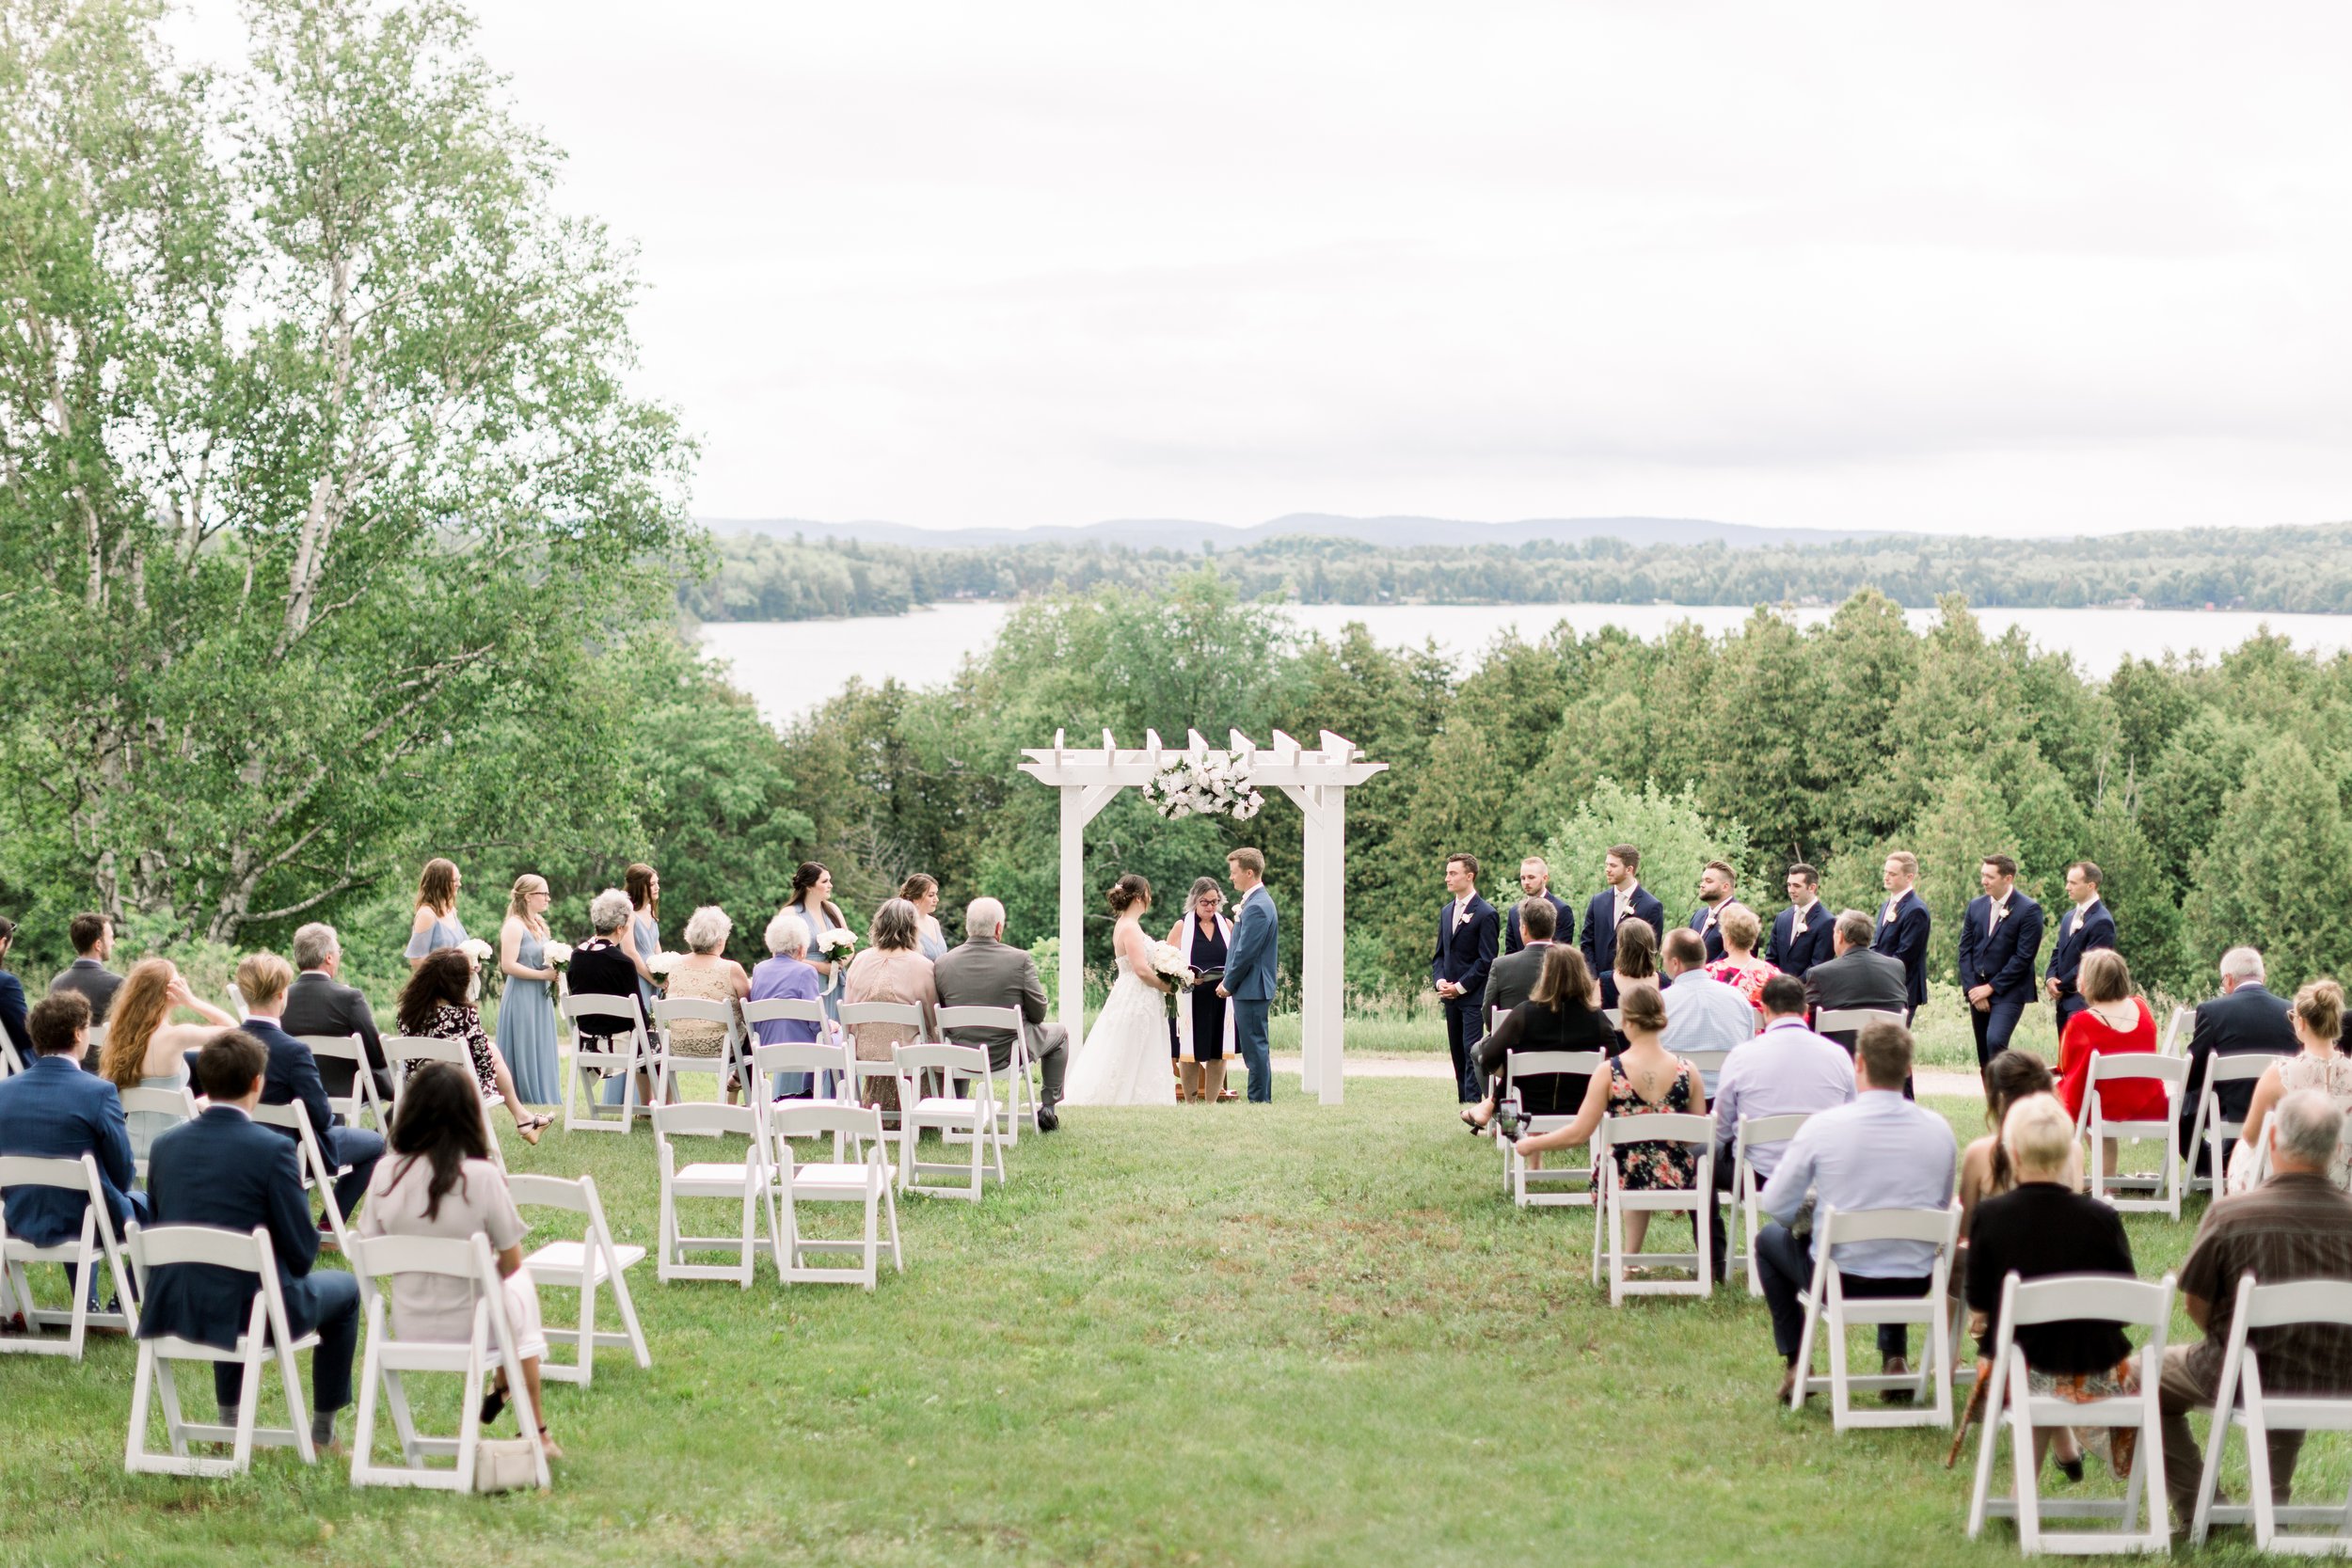  Bride and groom at the altar with wedding guests in the chairs overlooking a lake in Boulter by Chelsea Mason Photography. lake wedding #chelseamasonphotography #chelseamasonweddings #Ontarioweddings #Boulterweddingphotographer #laceweddinggown 